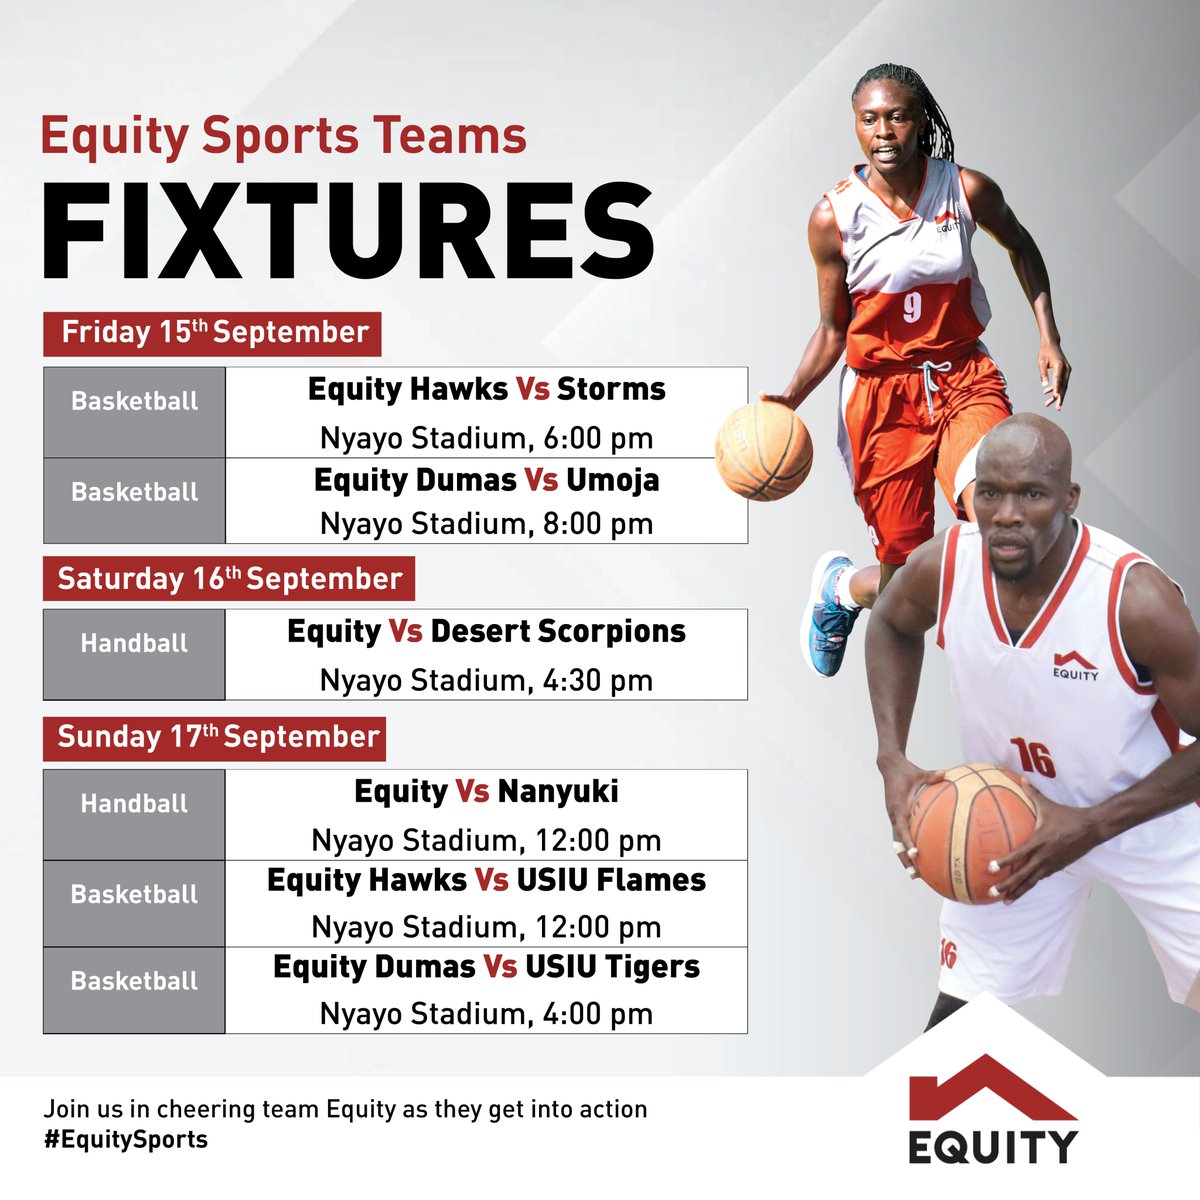 The Equity Basketball and Handball teams will play against various teams this weekend at the Nyayo Stadium. Be part of the action as we cheer the teams on! #EquitySports